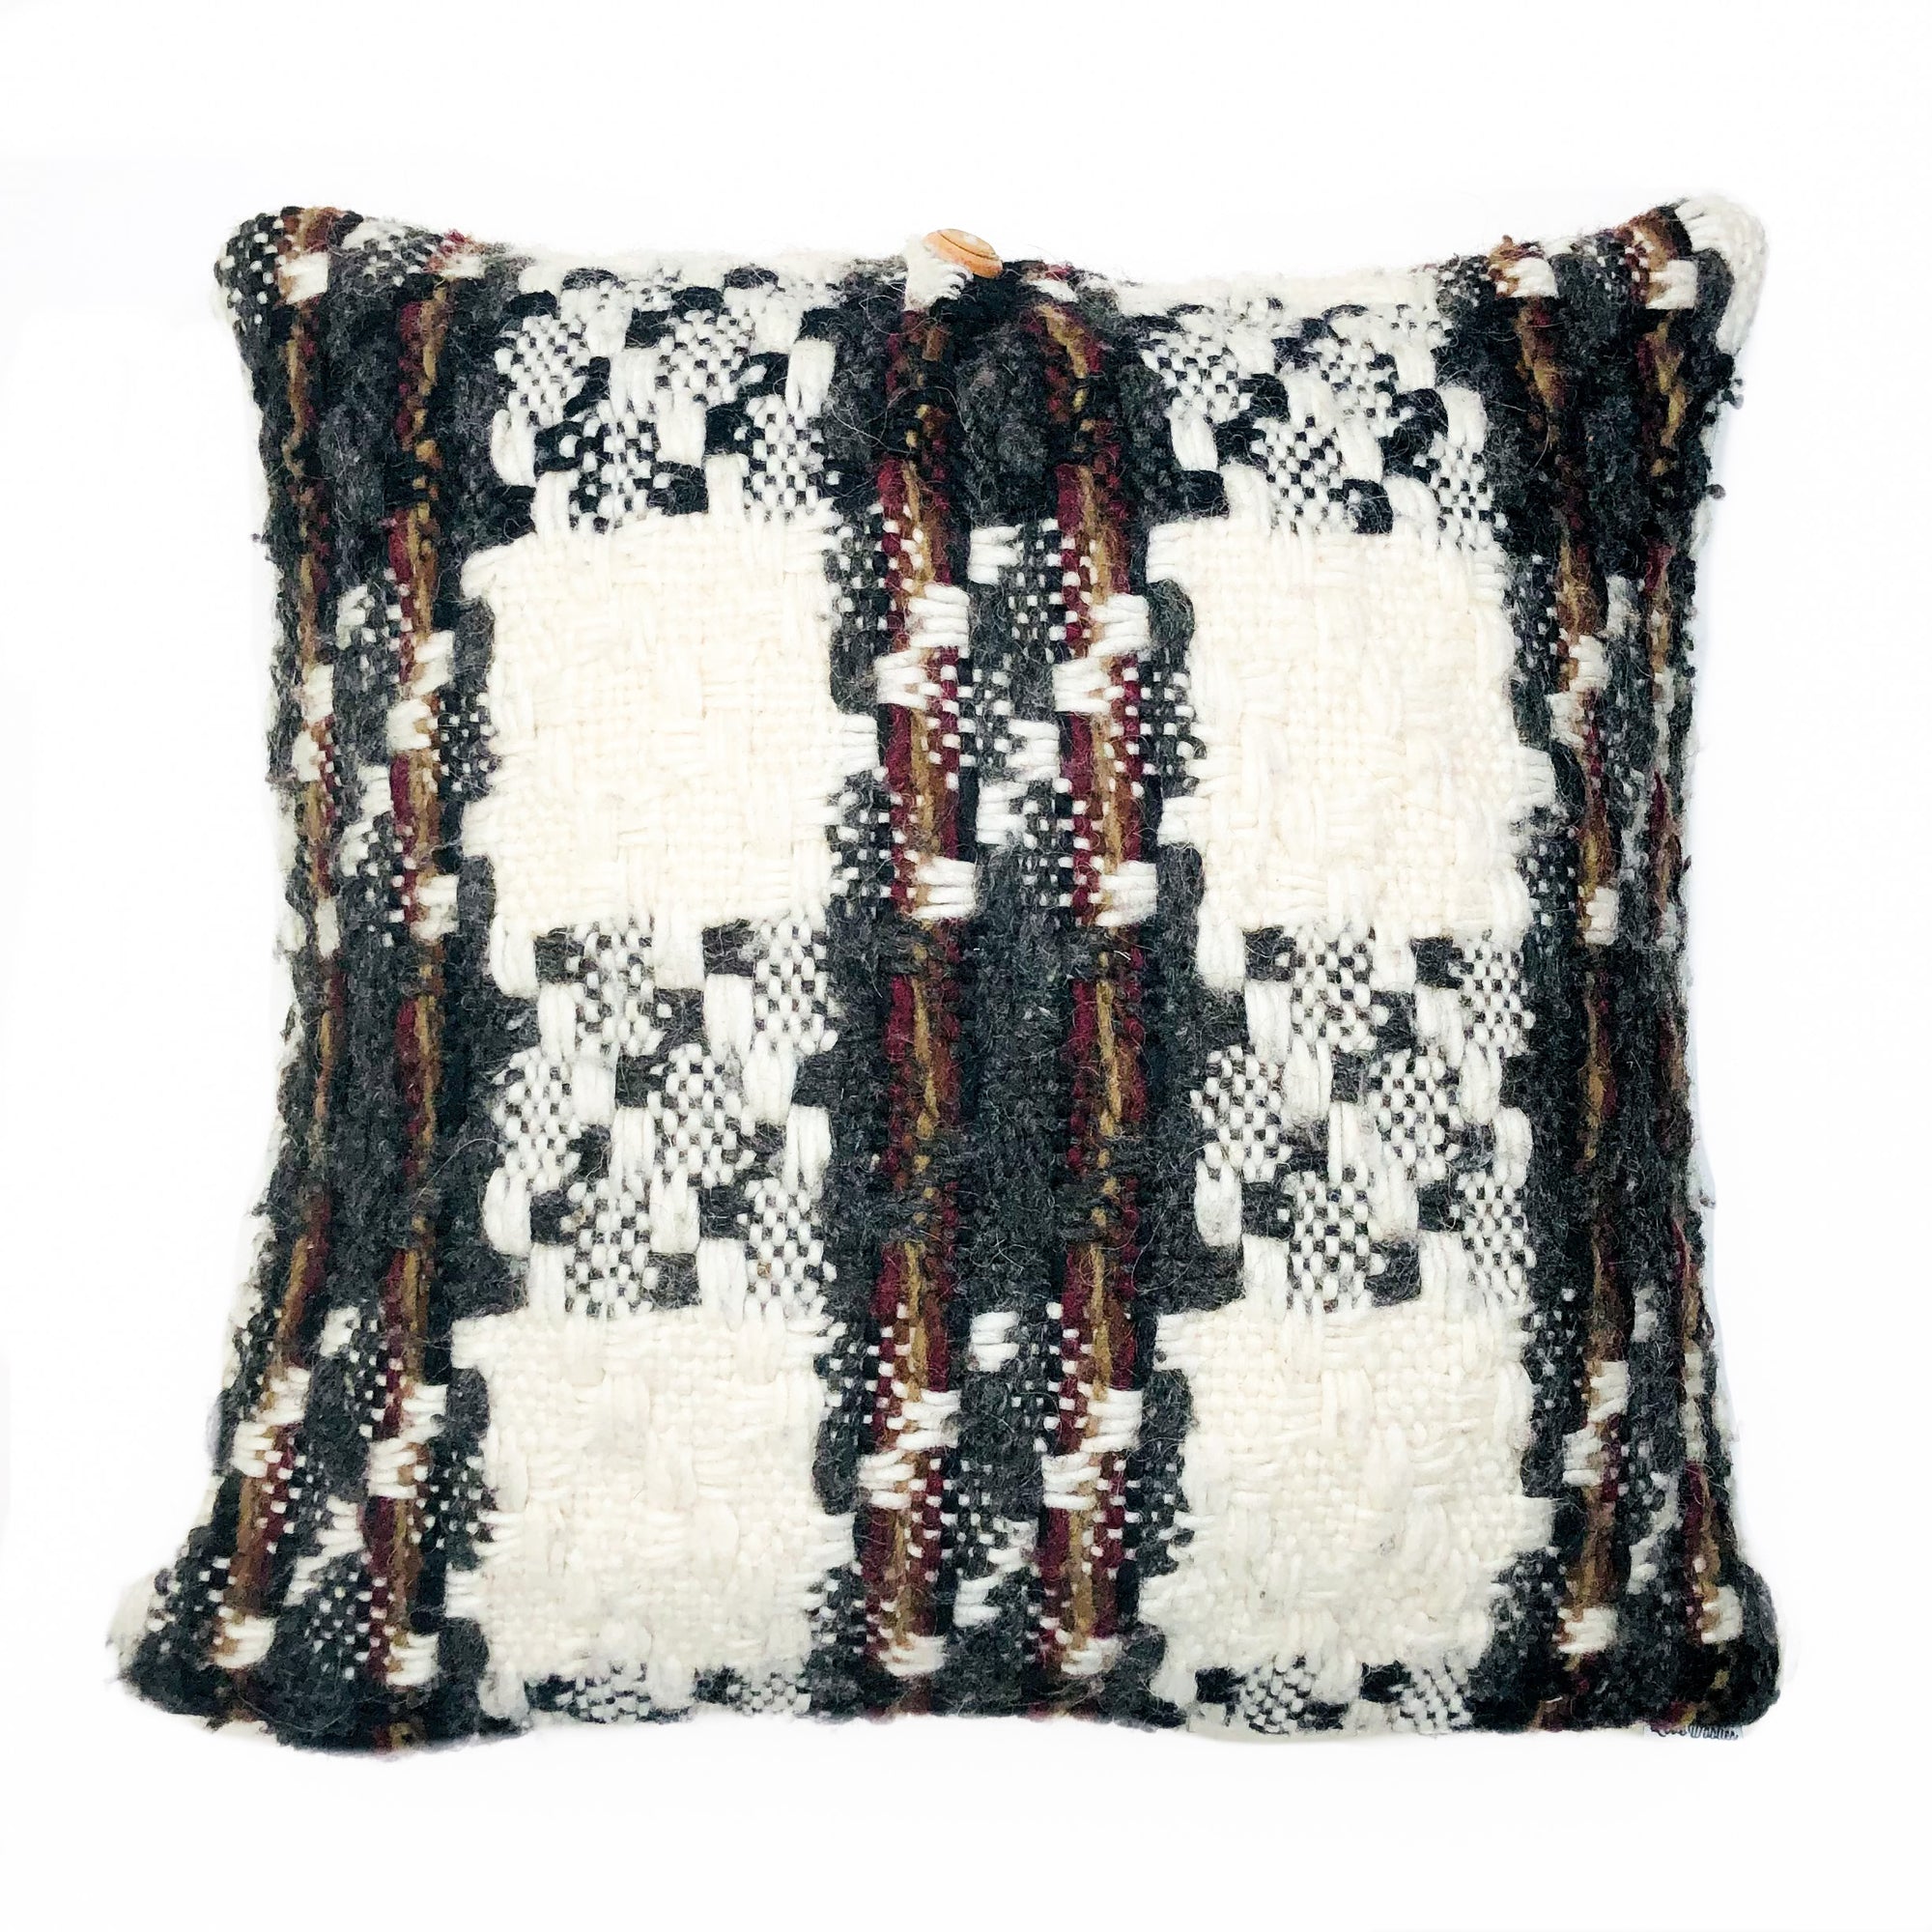 16 x 16 Winter Wool Pillow Cover